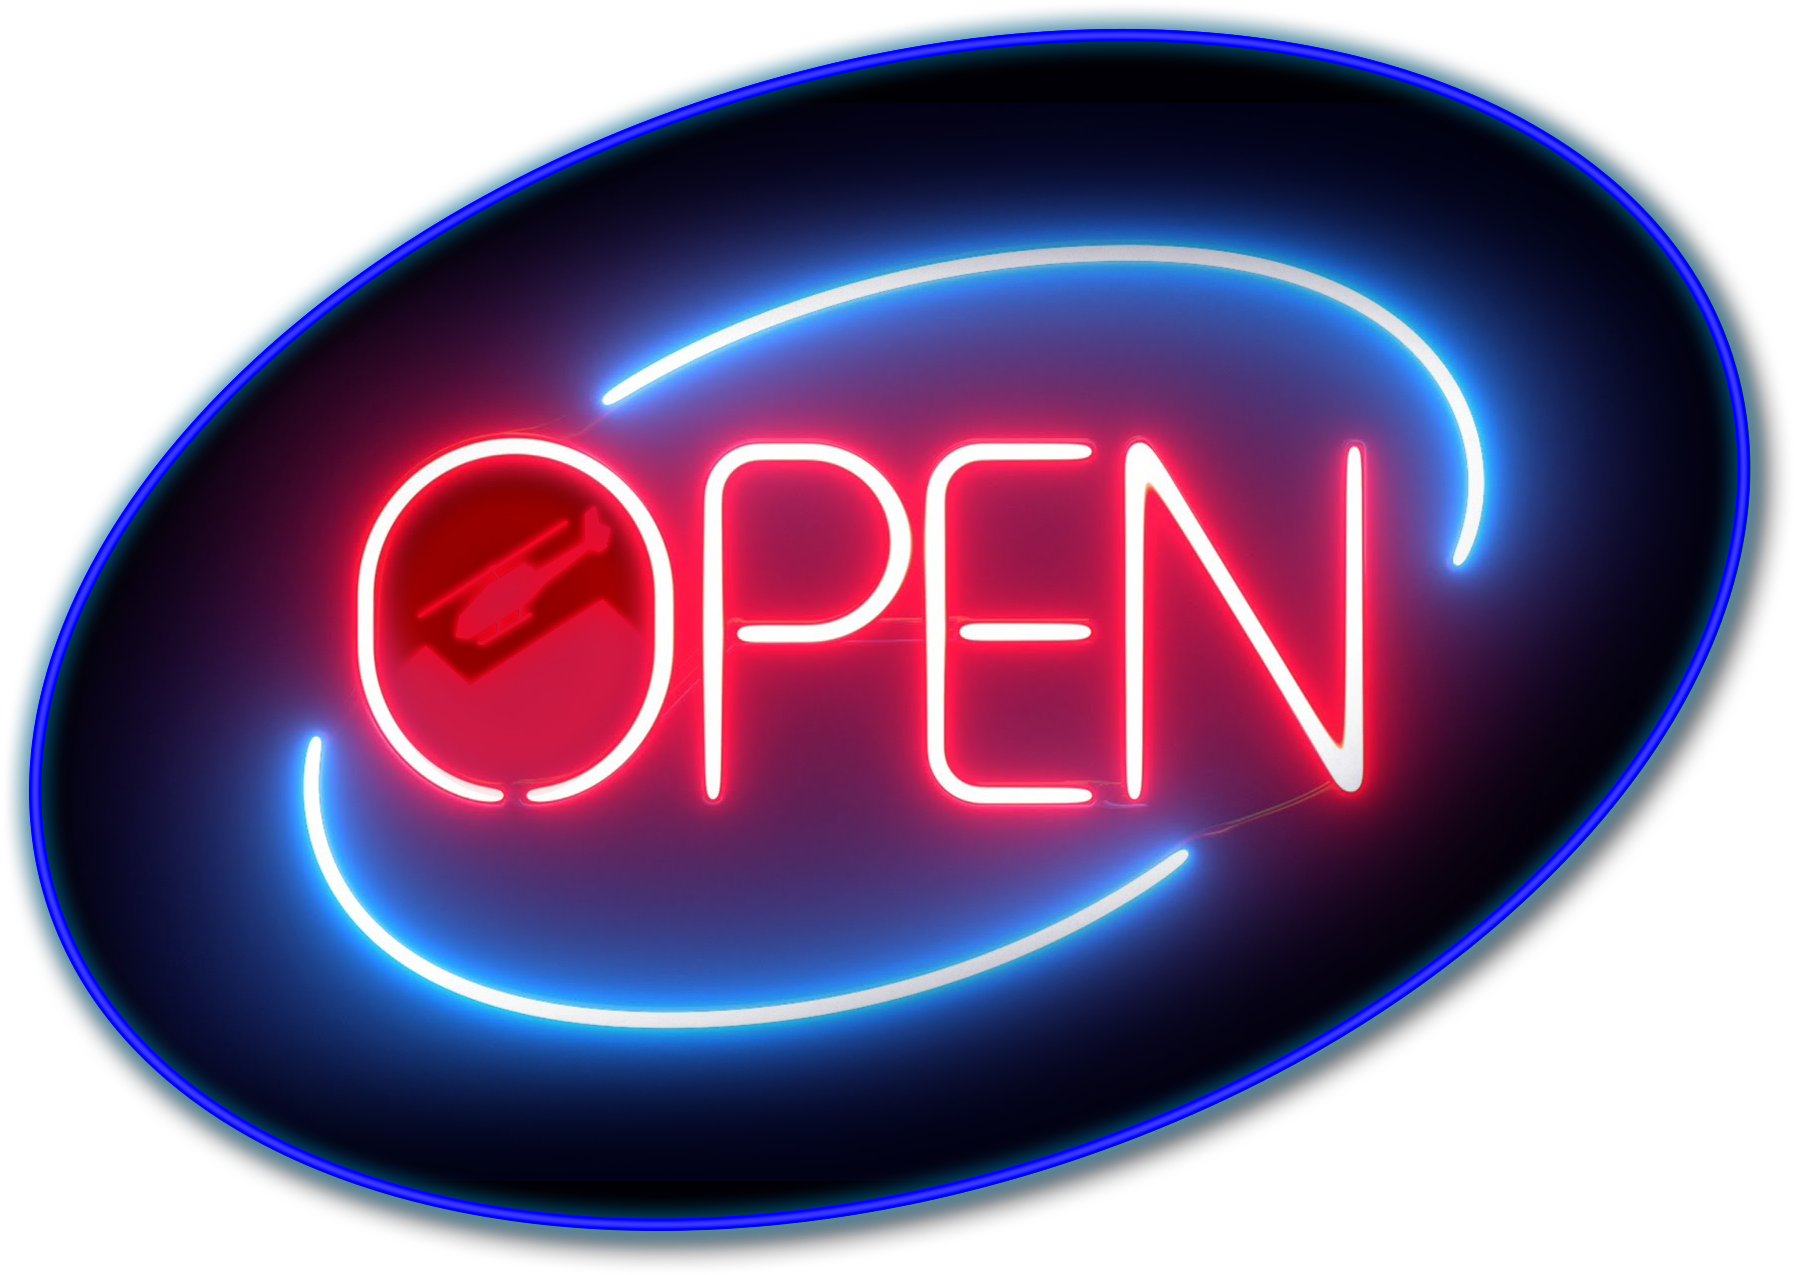 A Neon Sign With A Red And Blue Circle